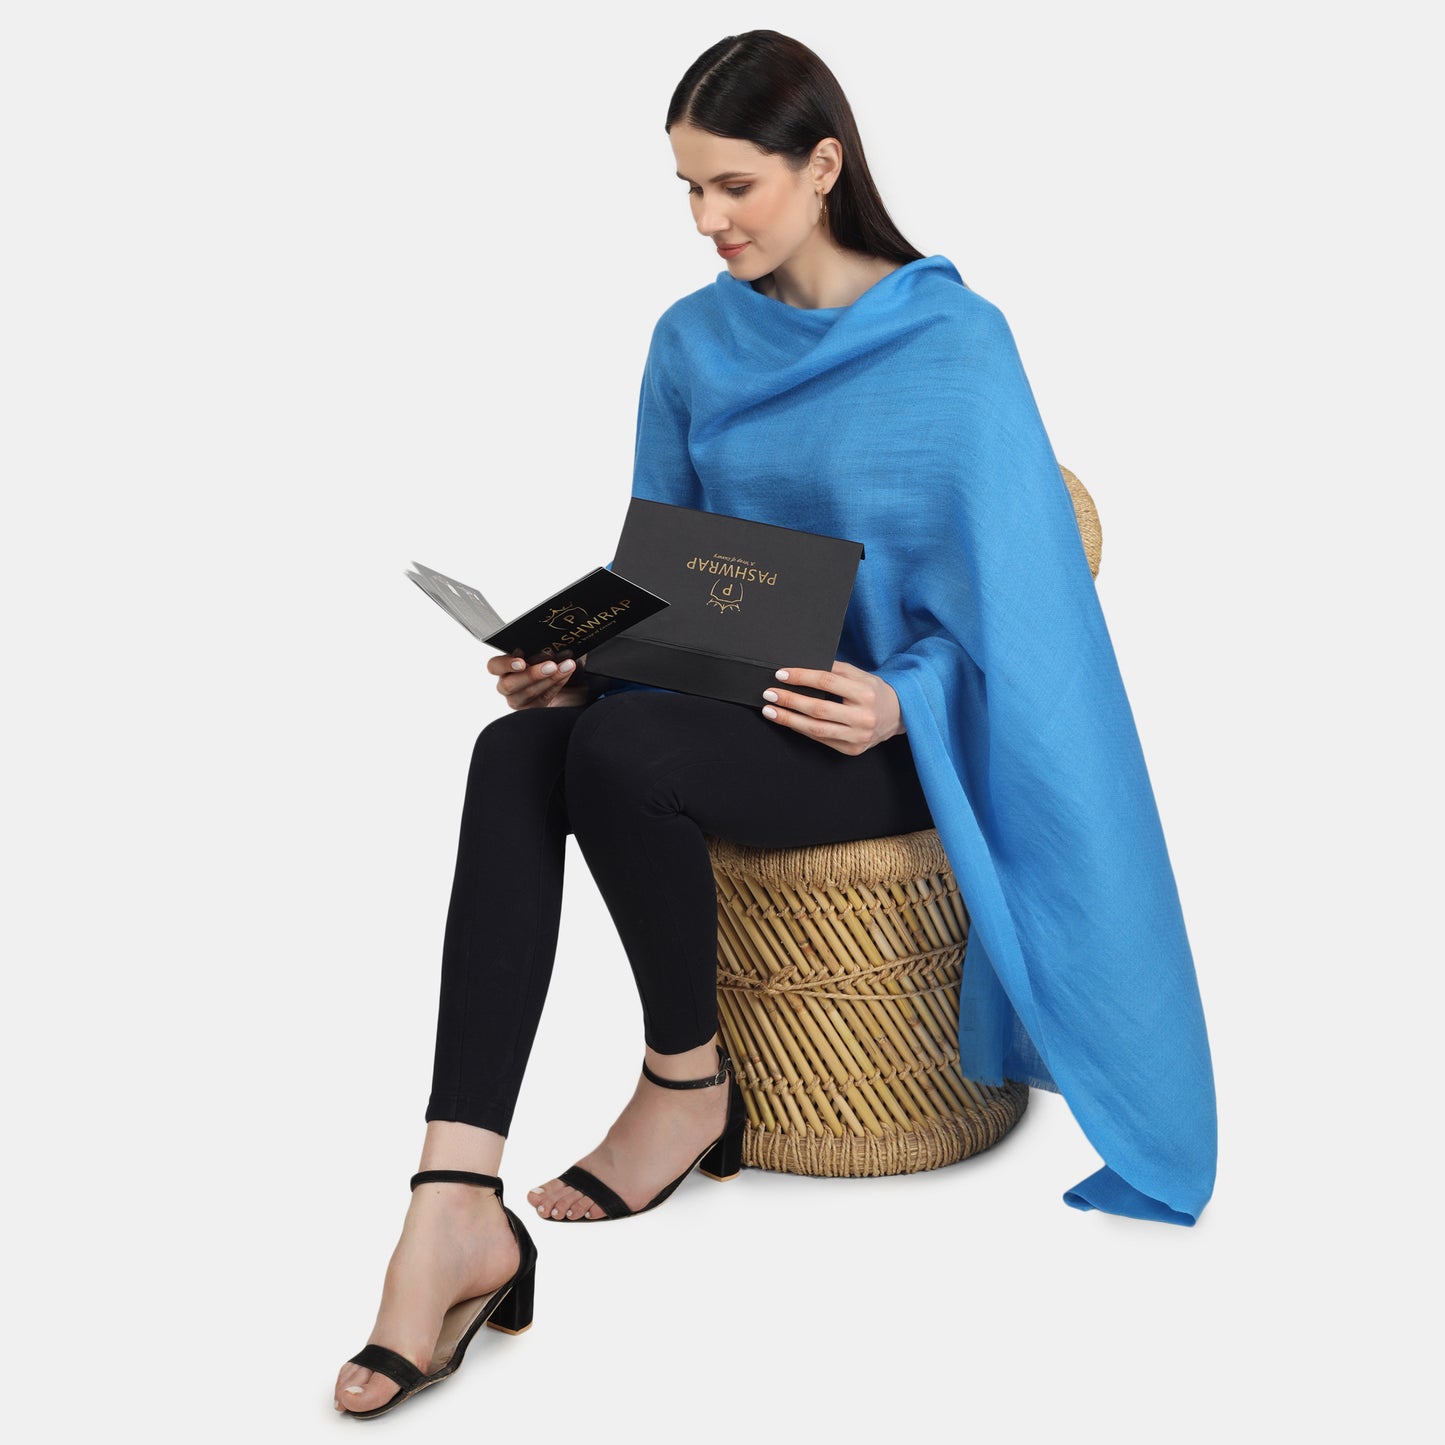 Image of a woman sitting on a chair and wearing a blue cashmere scarf, unboxing a Pashwrap cashmere scarf from a black box. She is holding a product booklet from the Pashwrap brand, which she appears to be reading with interest. The woman's expression is focused and attentive, with a slight smile on her lips. The blue scarf draped around her neck adds a pop of color to her outfit and is in contrast with the black box and the product booklet.